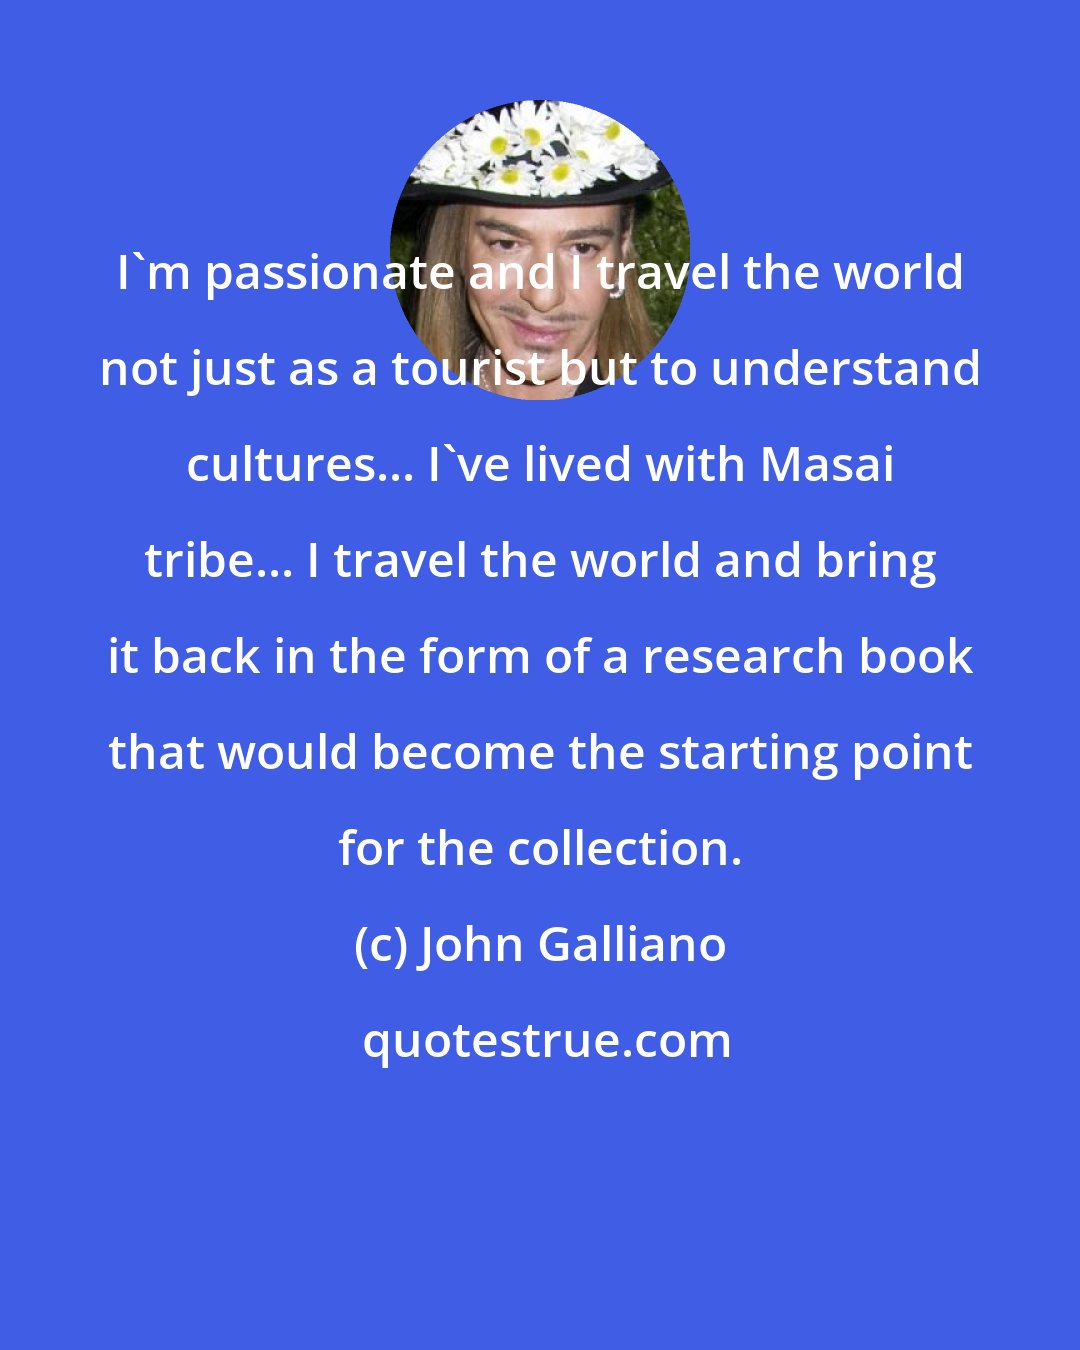 John Galliano: I'm passionate and I travel the world not just as a tourist but to understand cultures... I've lived with Masai tribe... I travel the world and bring it back in the form of a research book that would become the starting point for the collection.